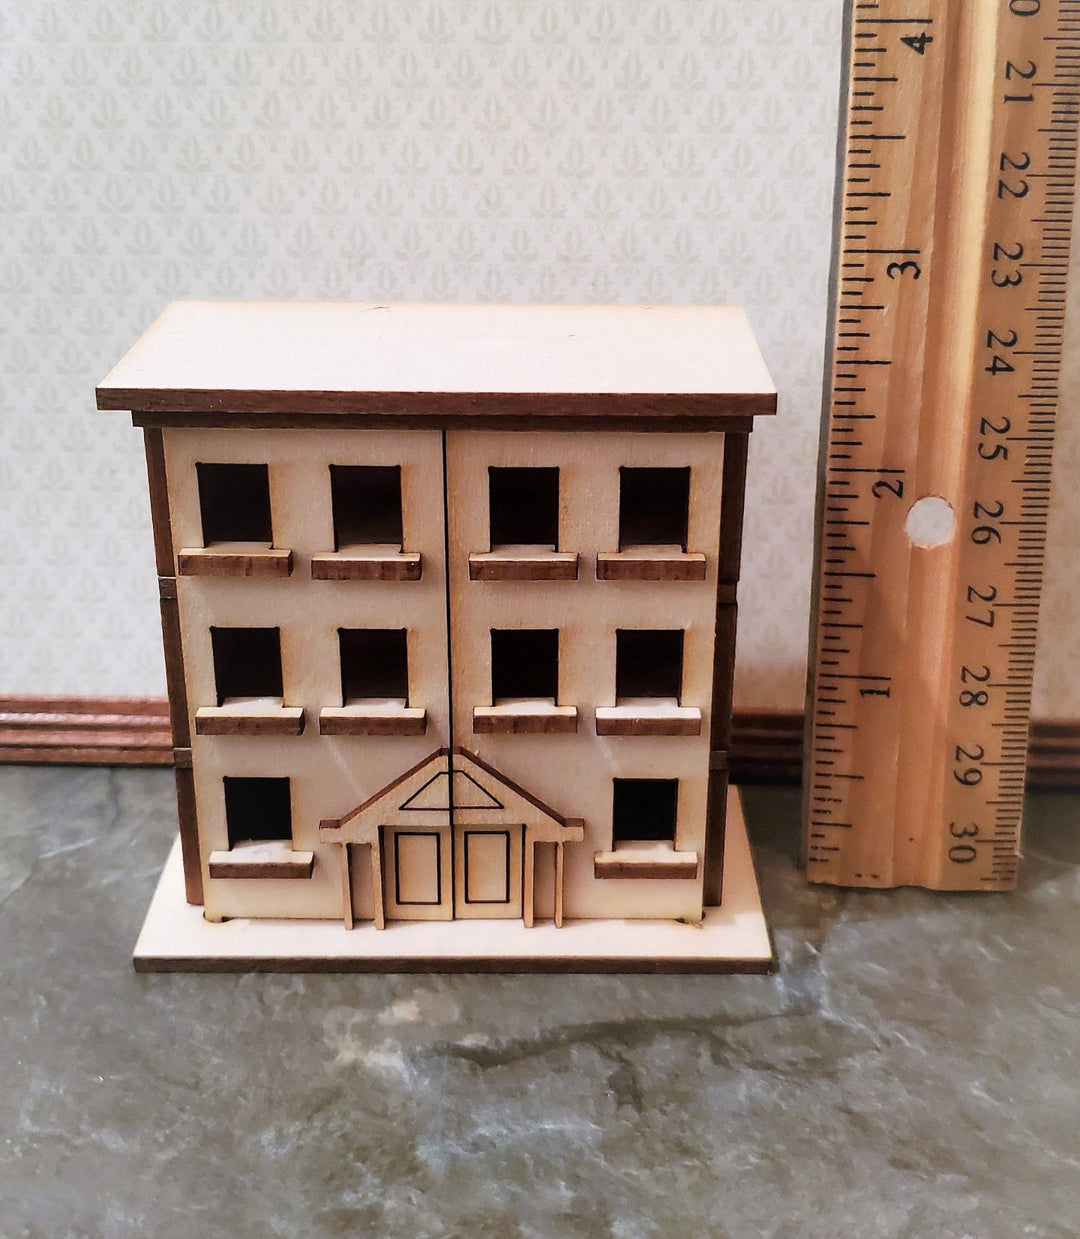 Dollhouse Miniature 1:144 Scale Kit House 3 Story Front Opening 6 Rooms - Miniature Crush